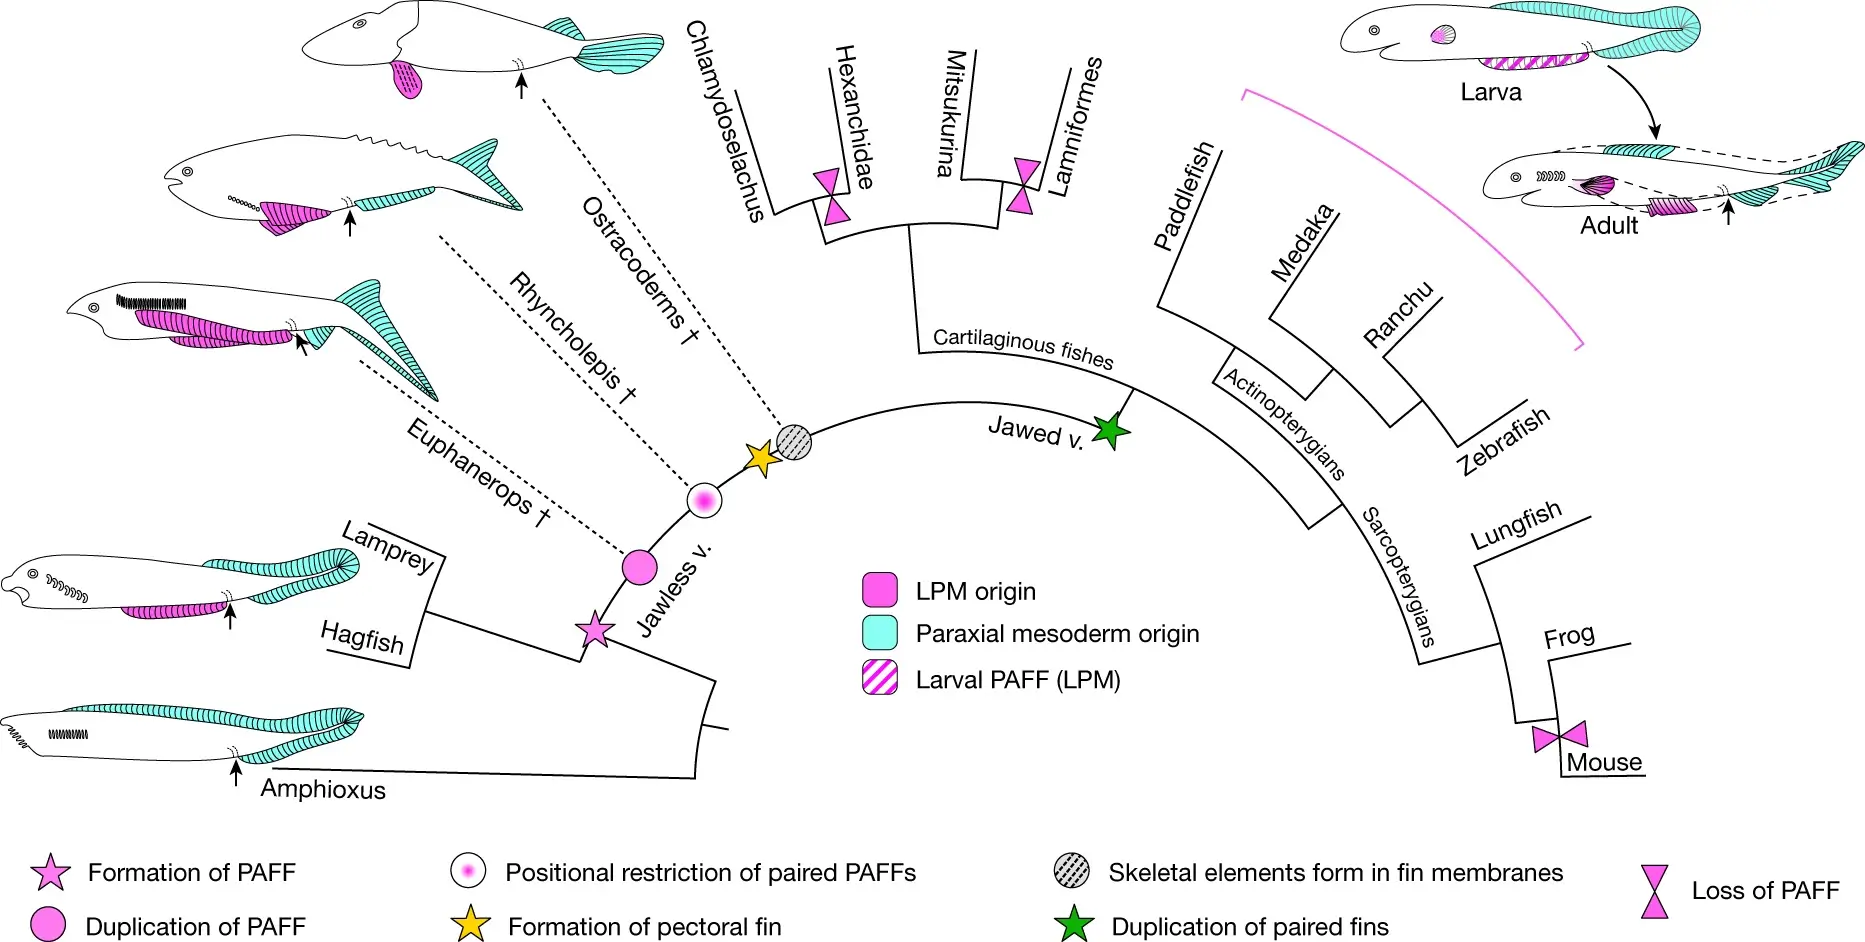 Simplified evolutionary scenario of vertebrates showing the presence of a PAFF and subsequent modifications leading to paired fins. Dashed lines and dagger symbols indicate extinct lineages, and solid lines indicate extant lineages. PM-derived fins and fin folds are in cyan, while LPM-derived fins are in pink. Larval PAFF is hatched. Black arrows indicate the position of the anus.